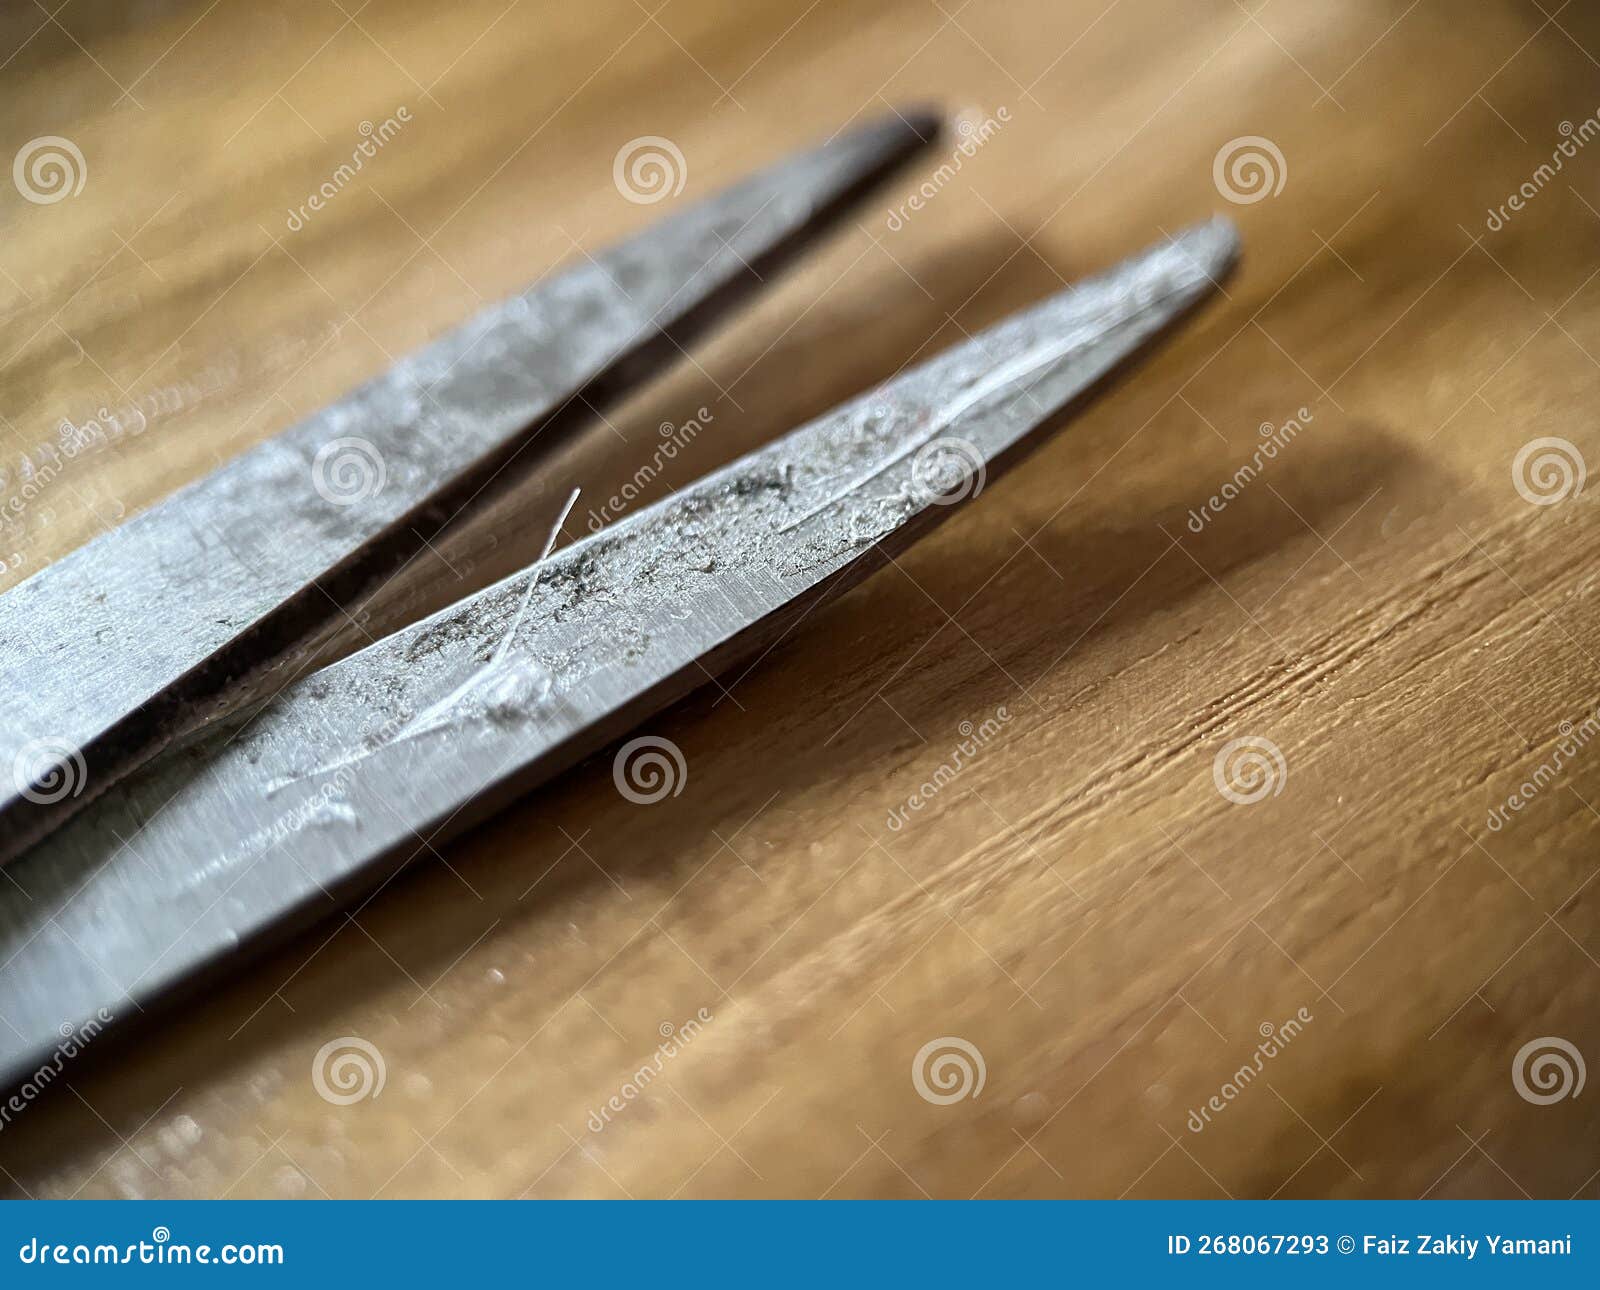 Scissor with Dirty Blade on Wooden Background Stock Image - Image of ...